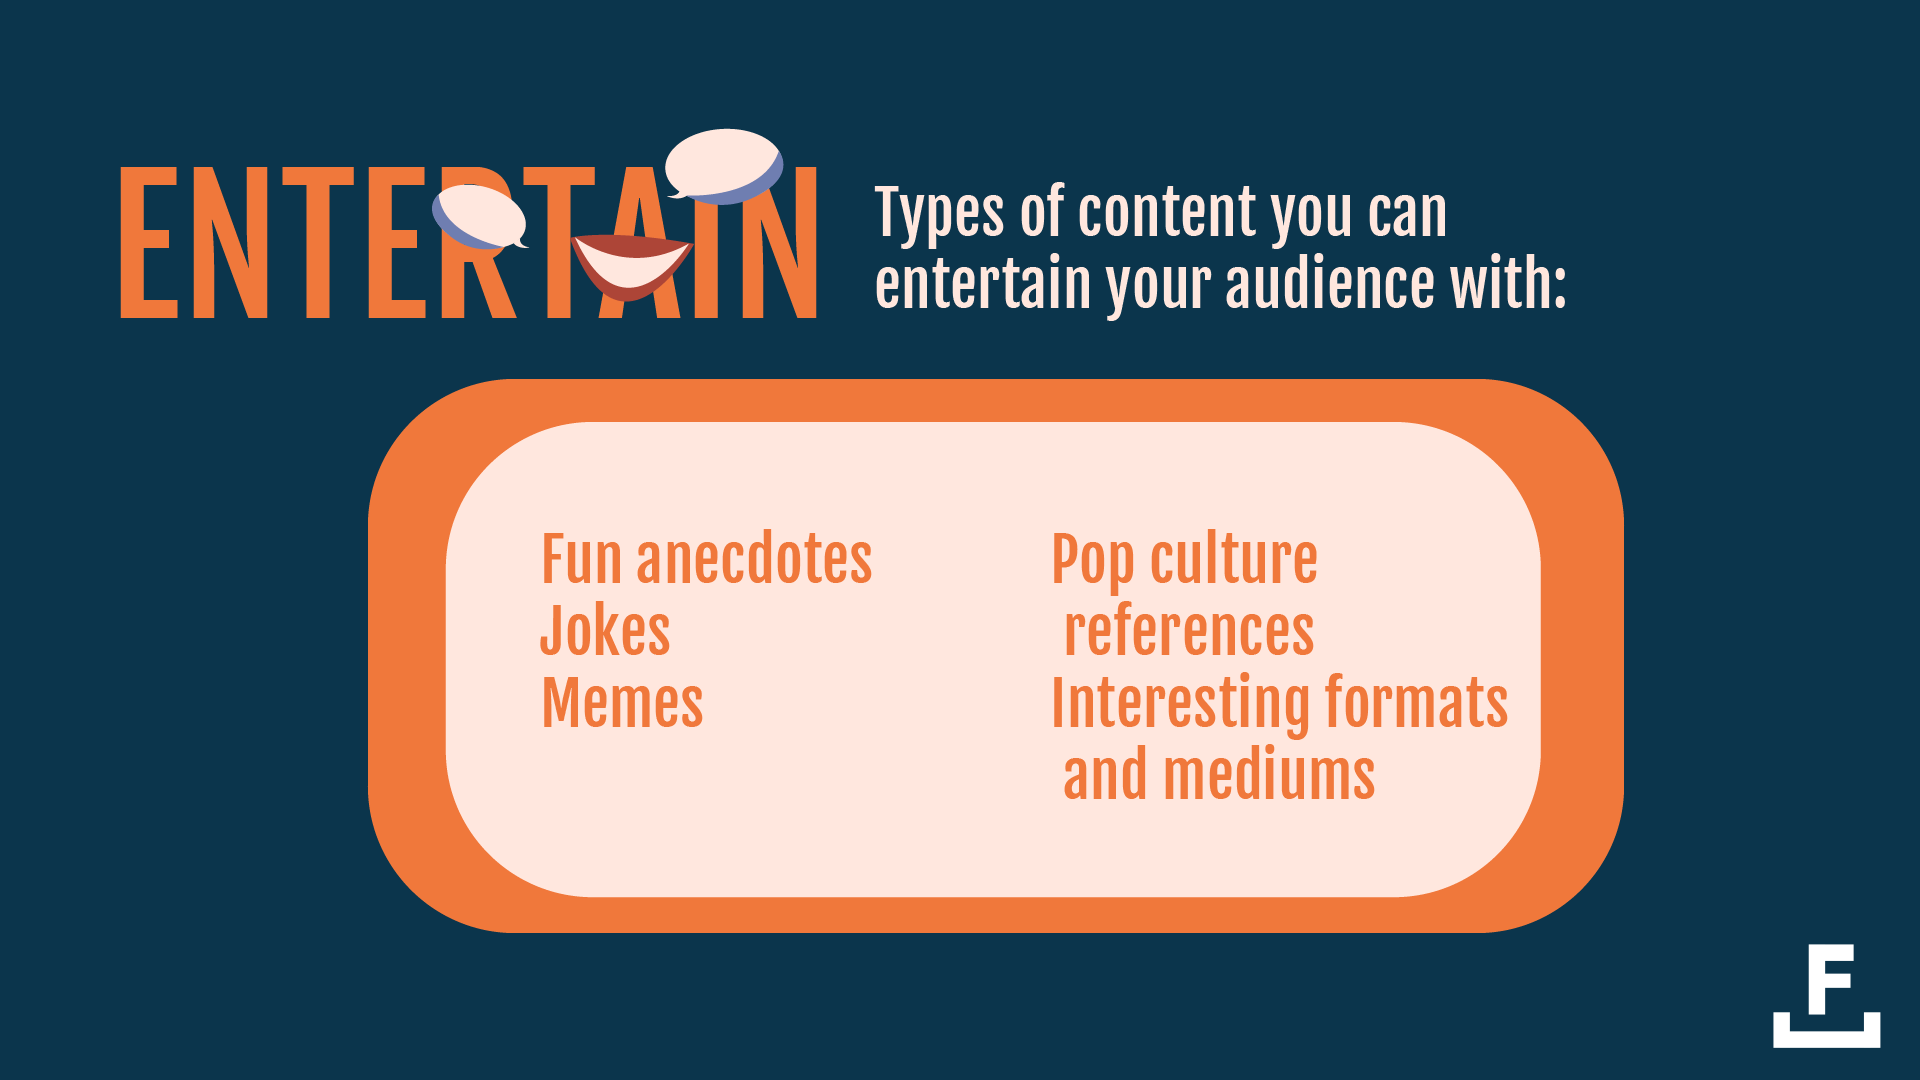 An image showing the types of content that work well to entertain an audience